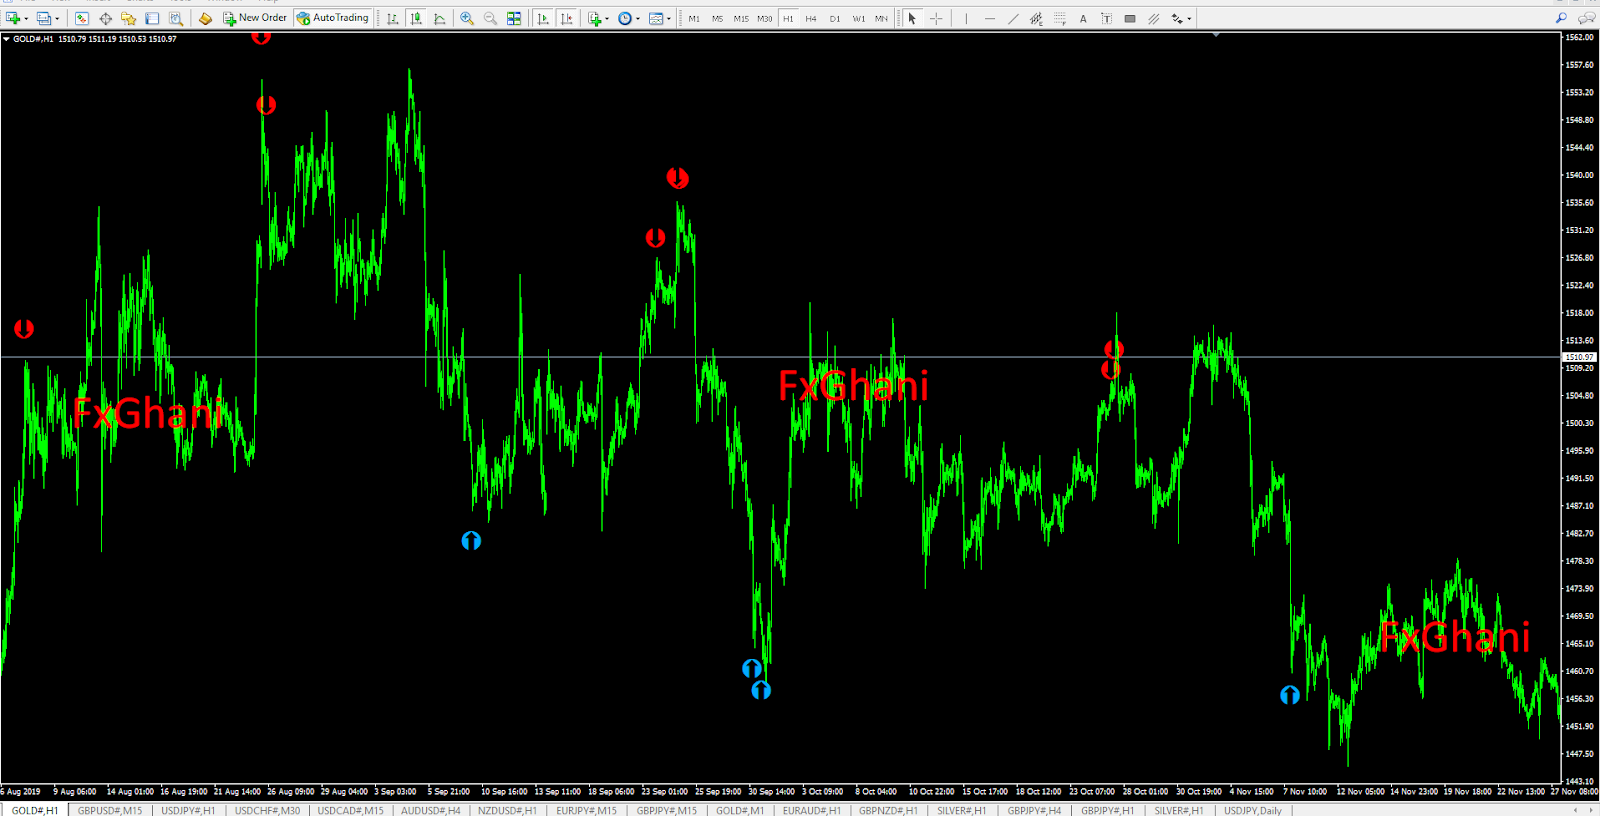 FxGhani Holy Grail Arrows MT4. - FxGhani Trading Learning ...